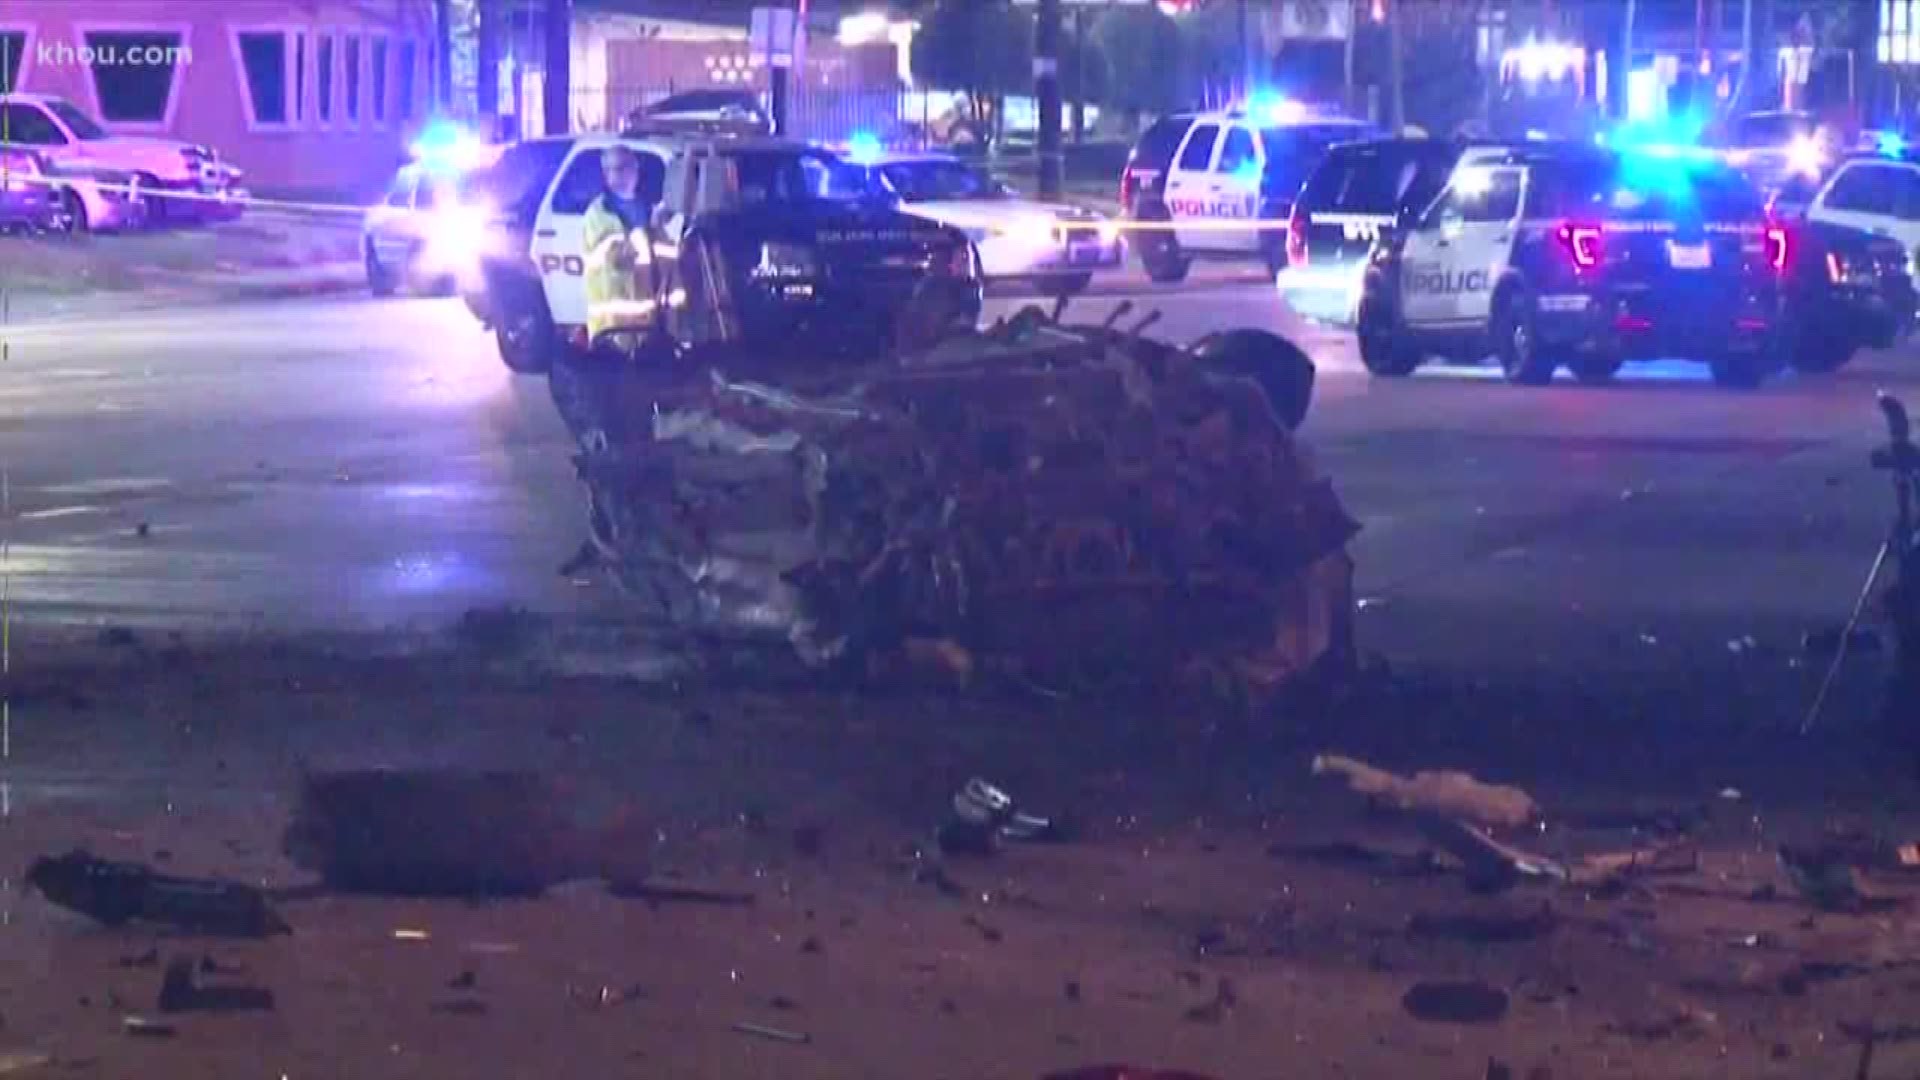 Two Houston police officers were hurt, one critically, in a head-on crash involving a suspected drunken driver, according to the police department.